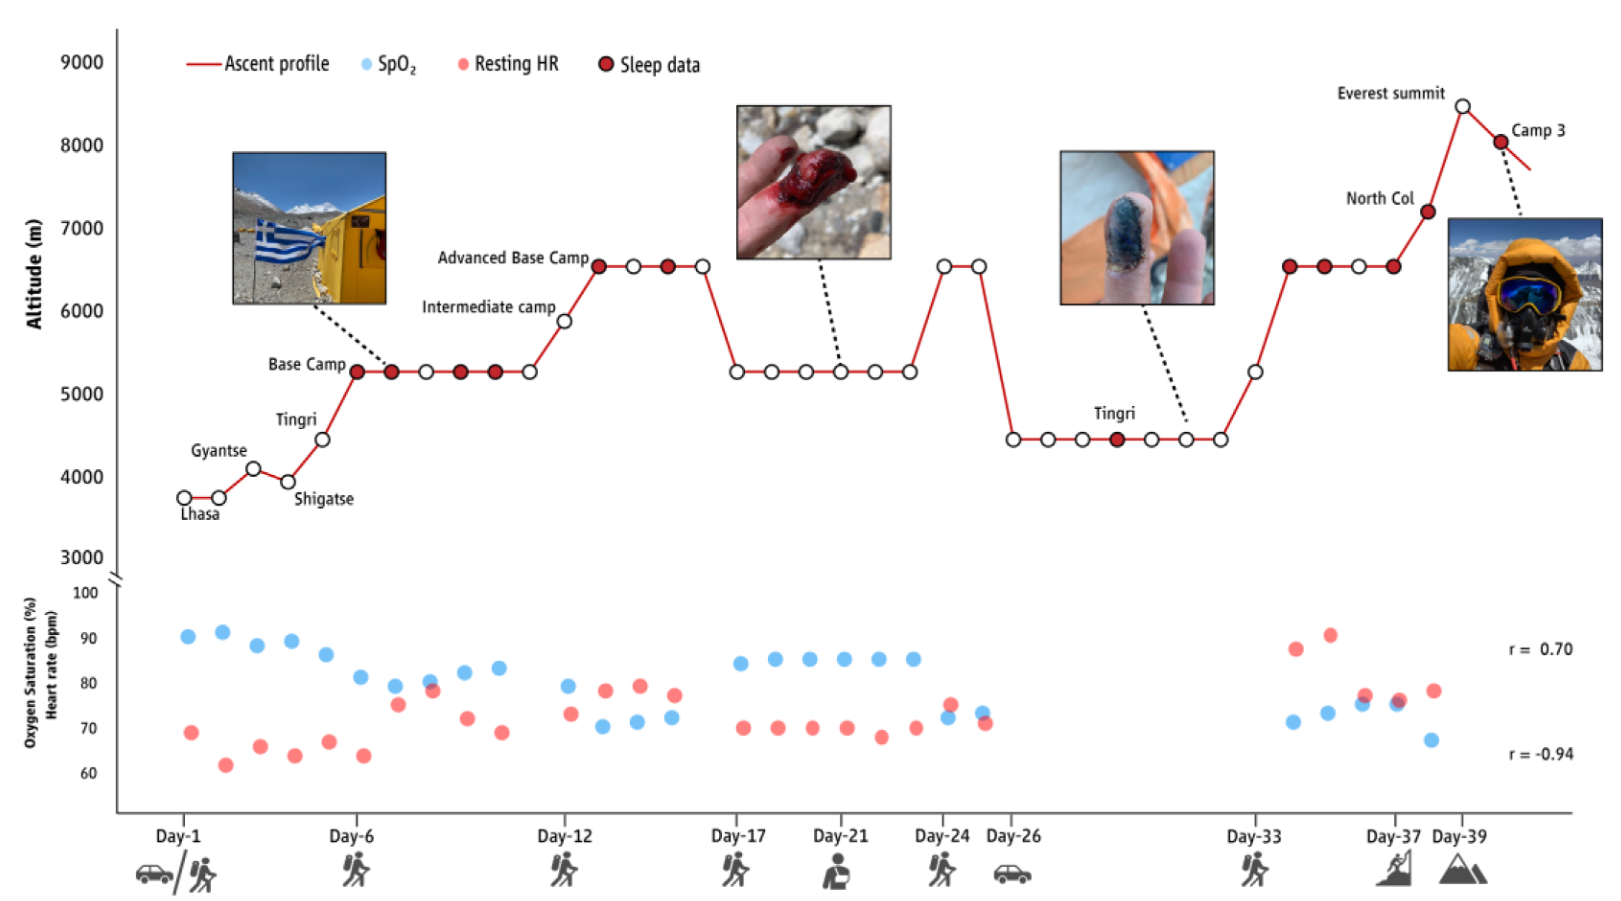 Night-Time Heart Rate Variability during an Expedition to Mt Everest: A Case Report